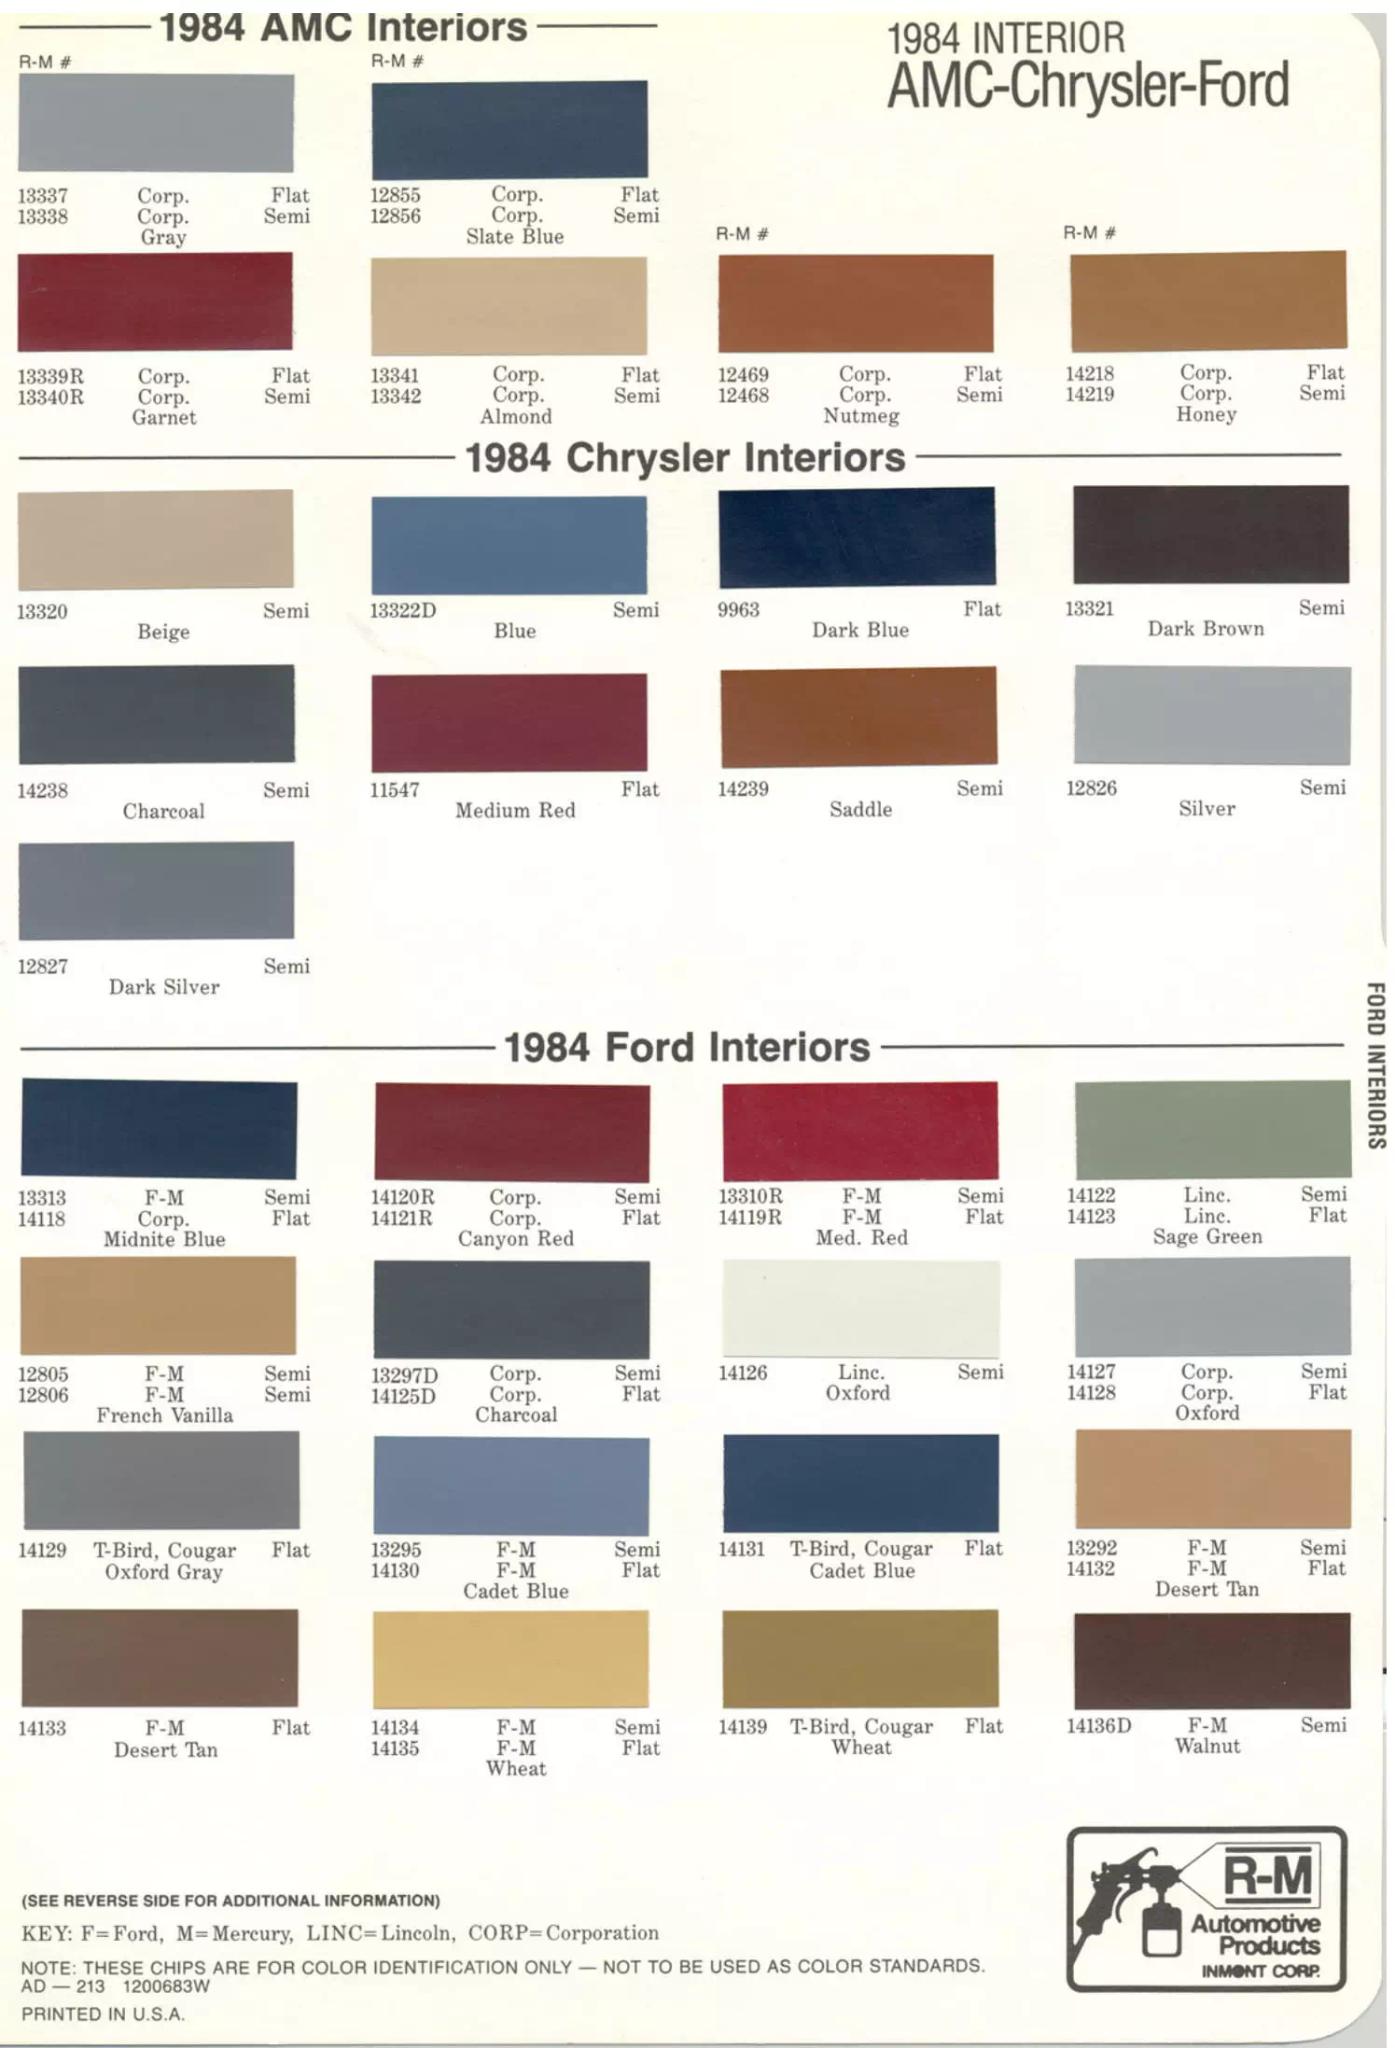 Color Codes used to repaint Interiors on Ford Motor Company Vehicles in 1984